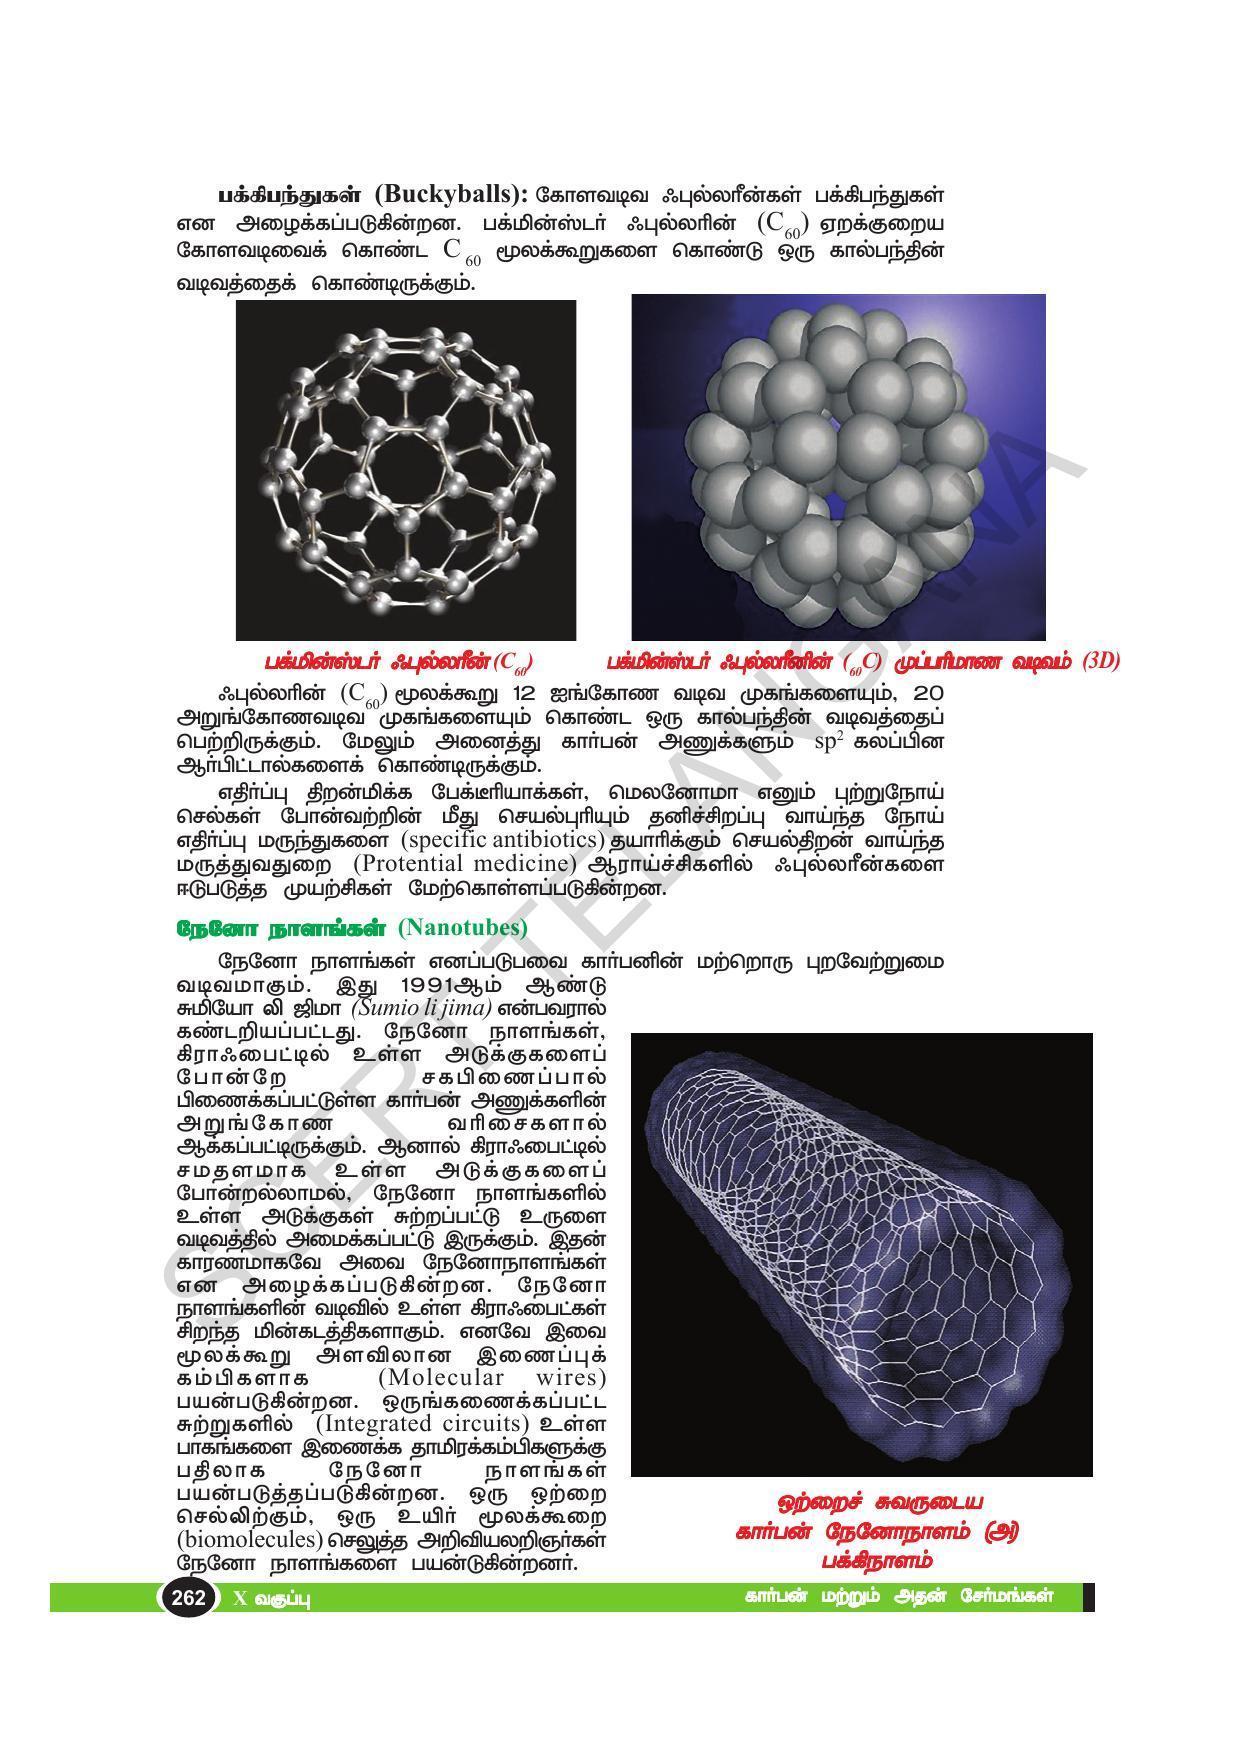 TS SCERT Class 10 Physical Science(Tamil Medium) Text Book - Page 274